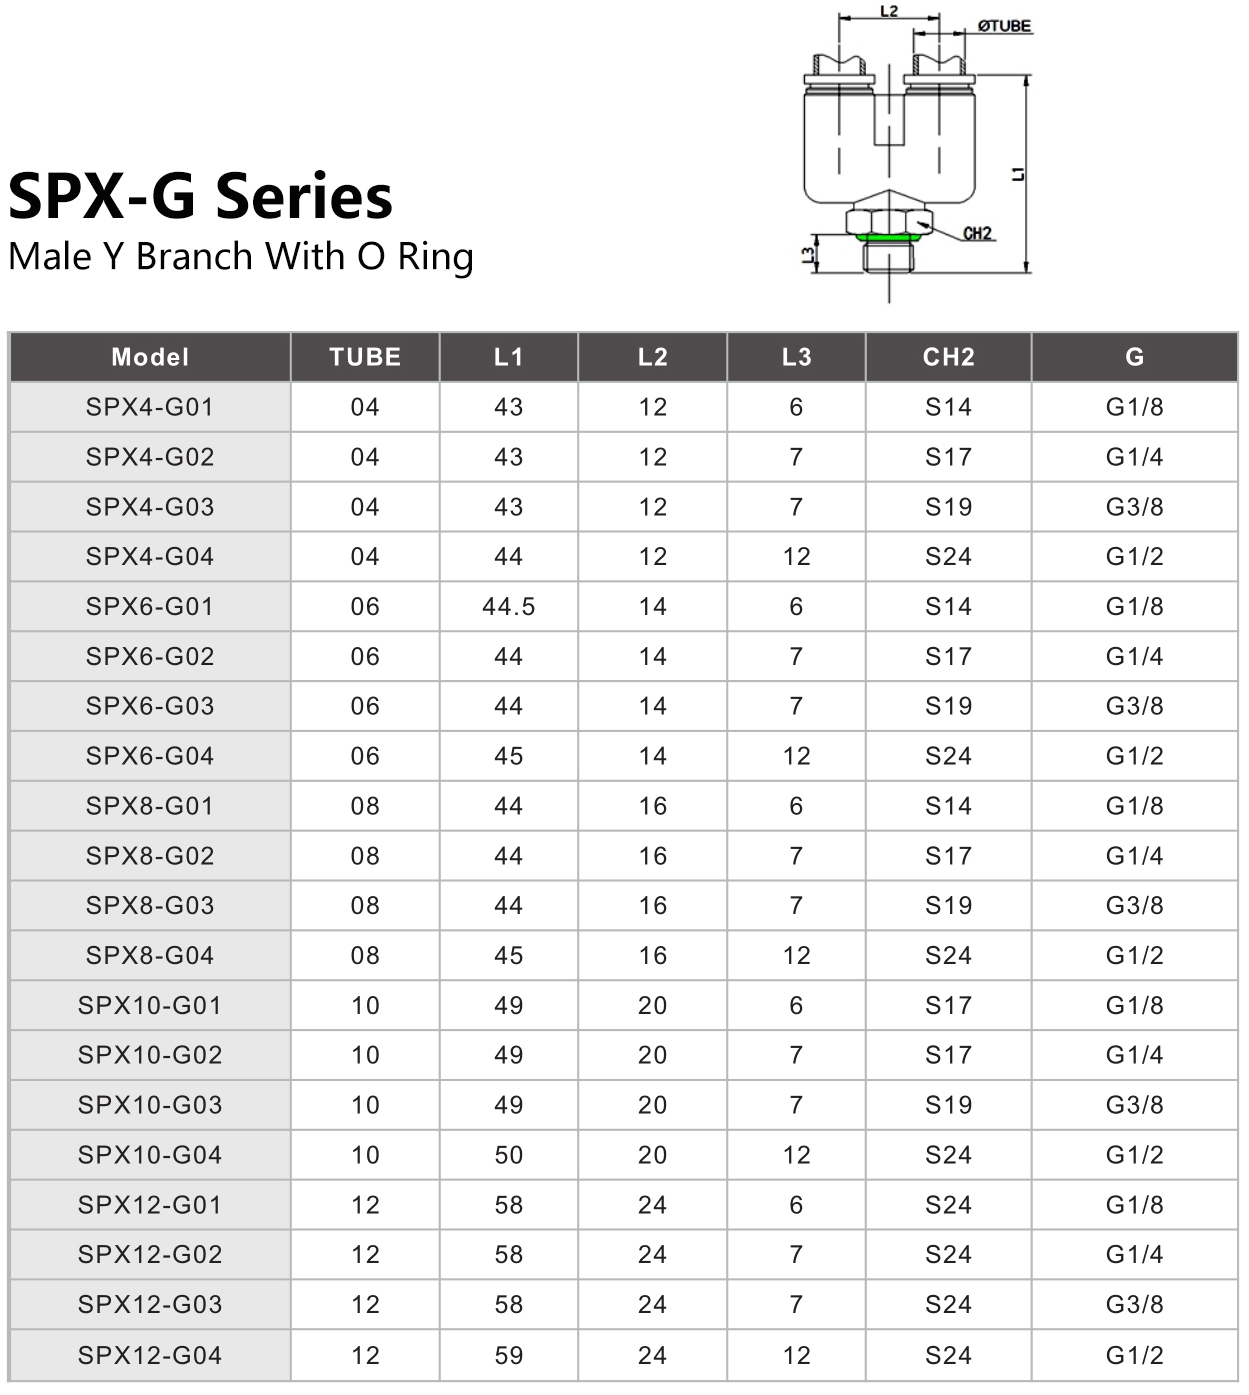 SPX-G Series Male Y Branch With O Ring